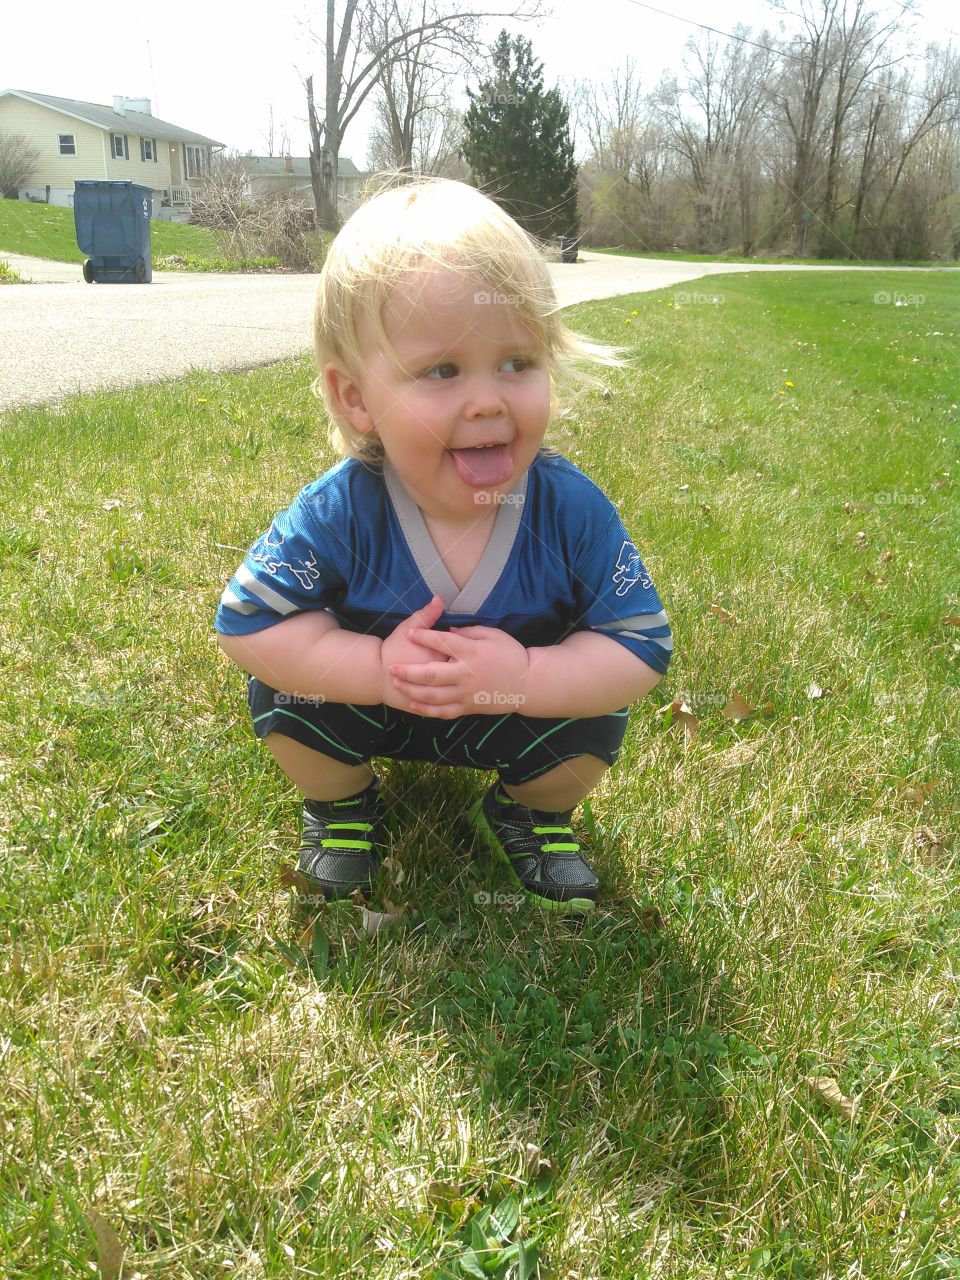 toddler totally posing for the camera
wearing Detroit lions t shirt